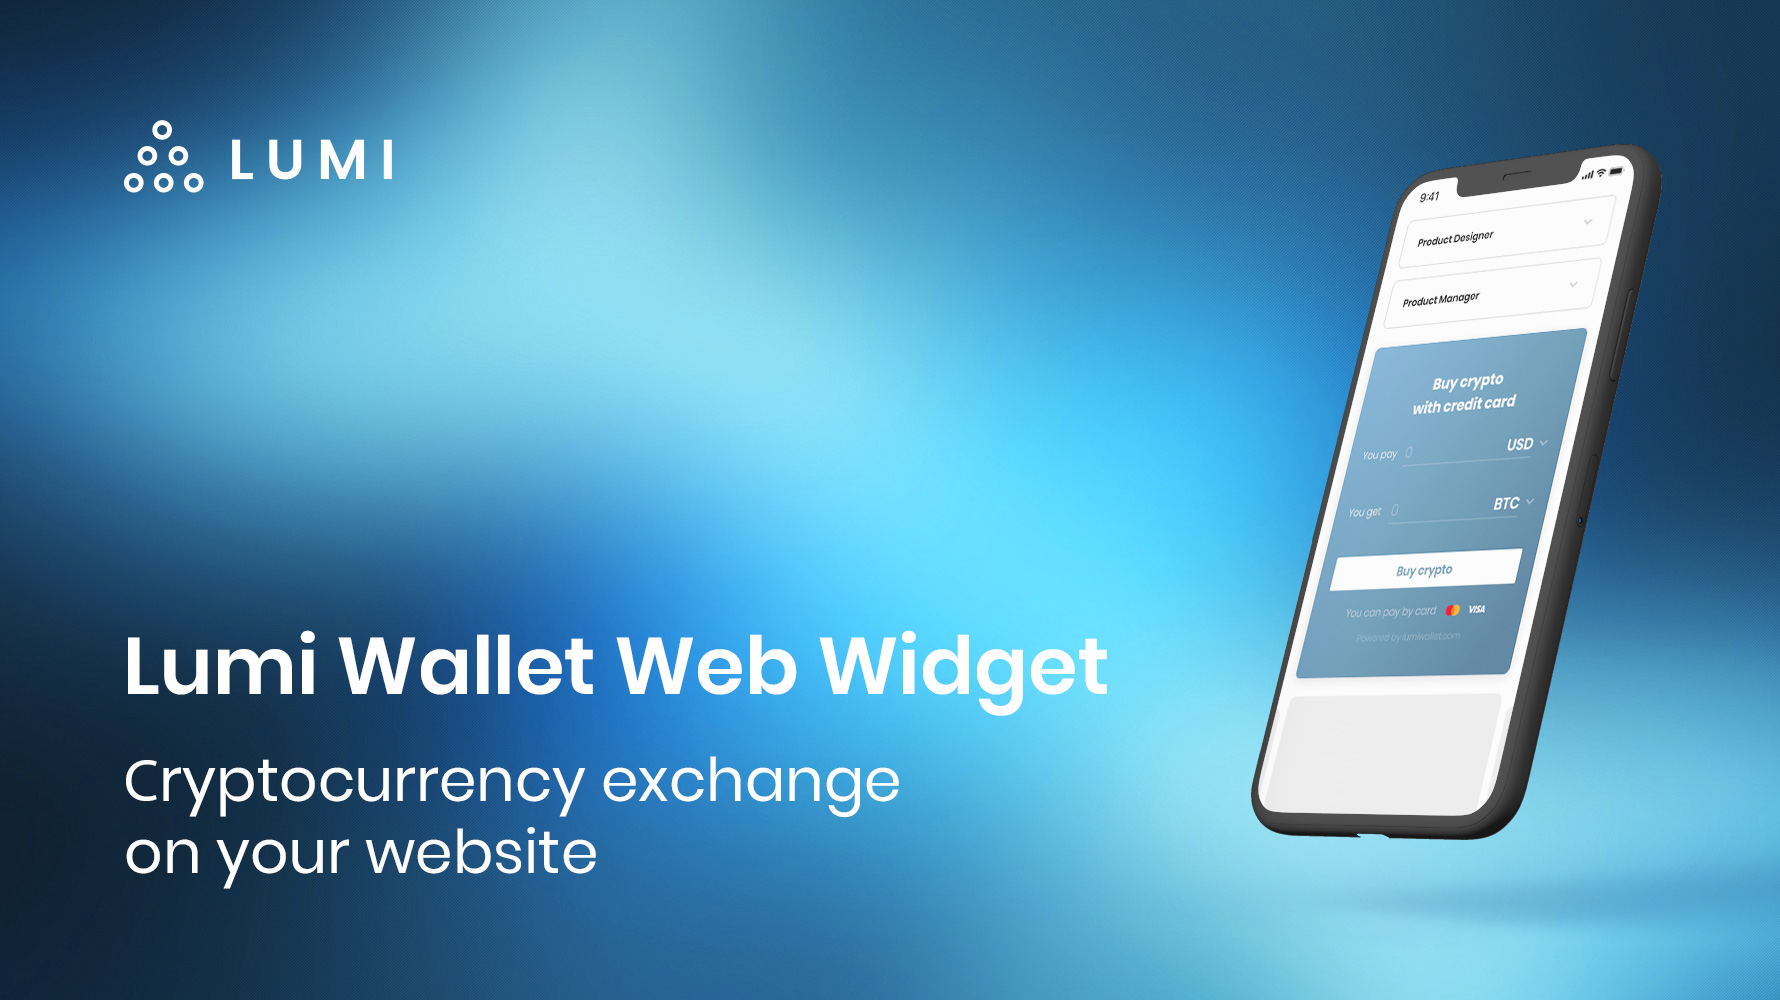 Crypto widget for website fiat support means crypto